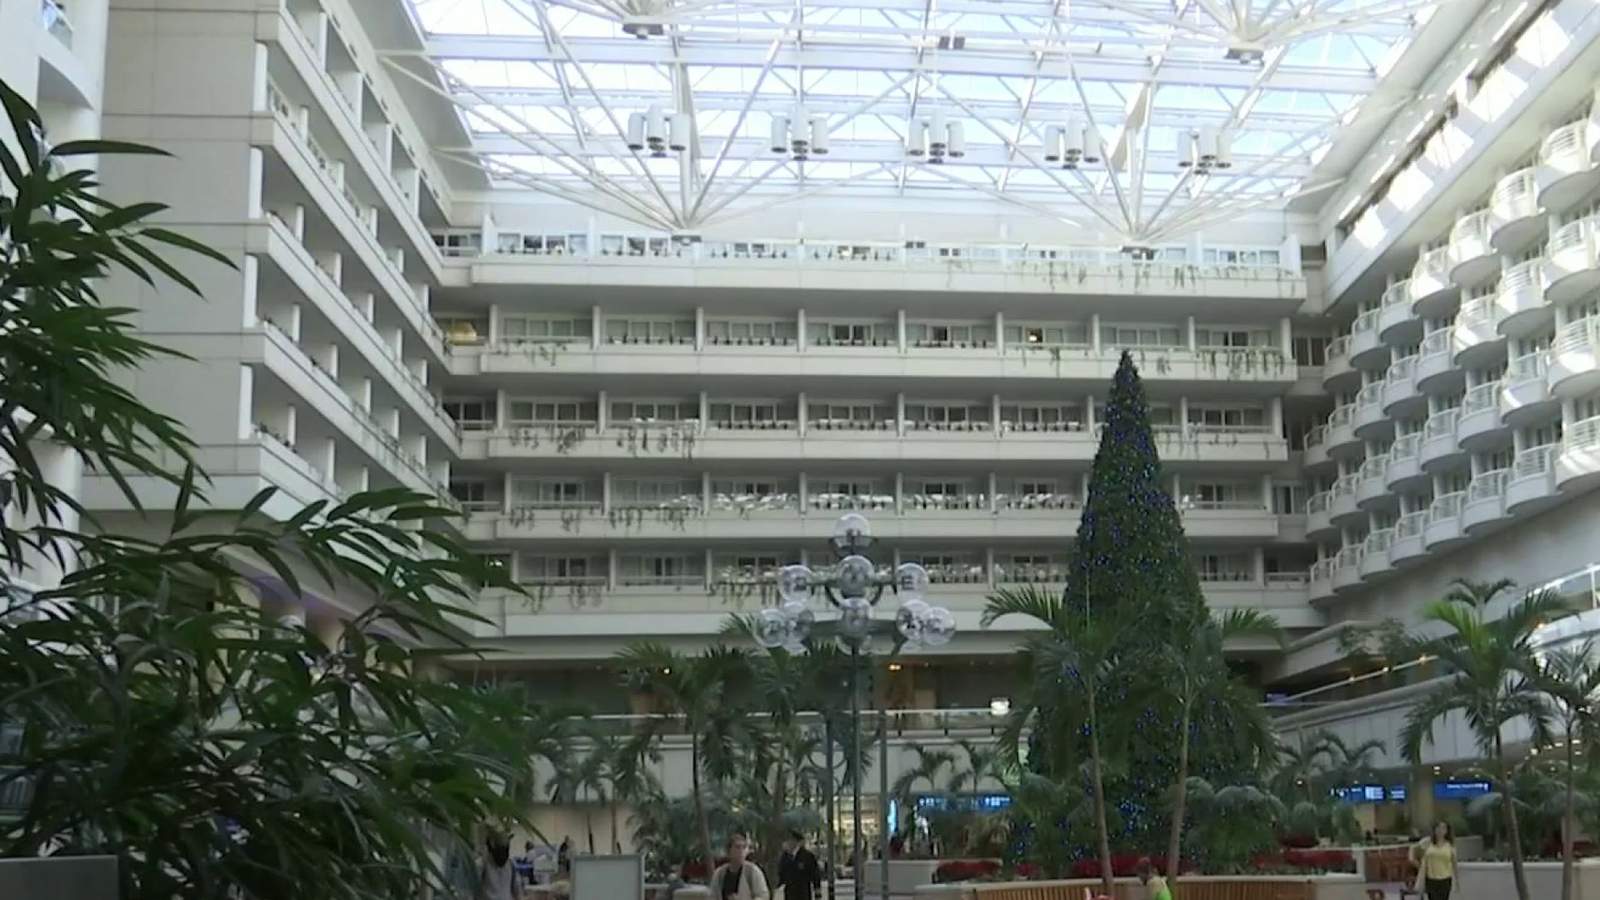 Orlando International Airport expects 90,000 passengers to pass through on Sunday after Thanksgiving